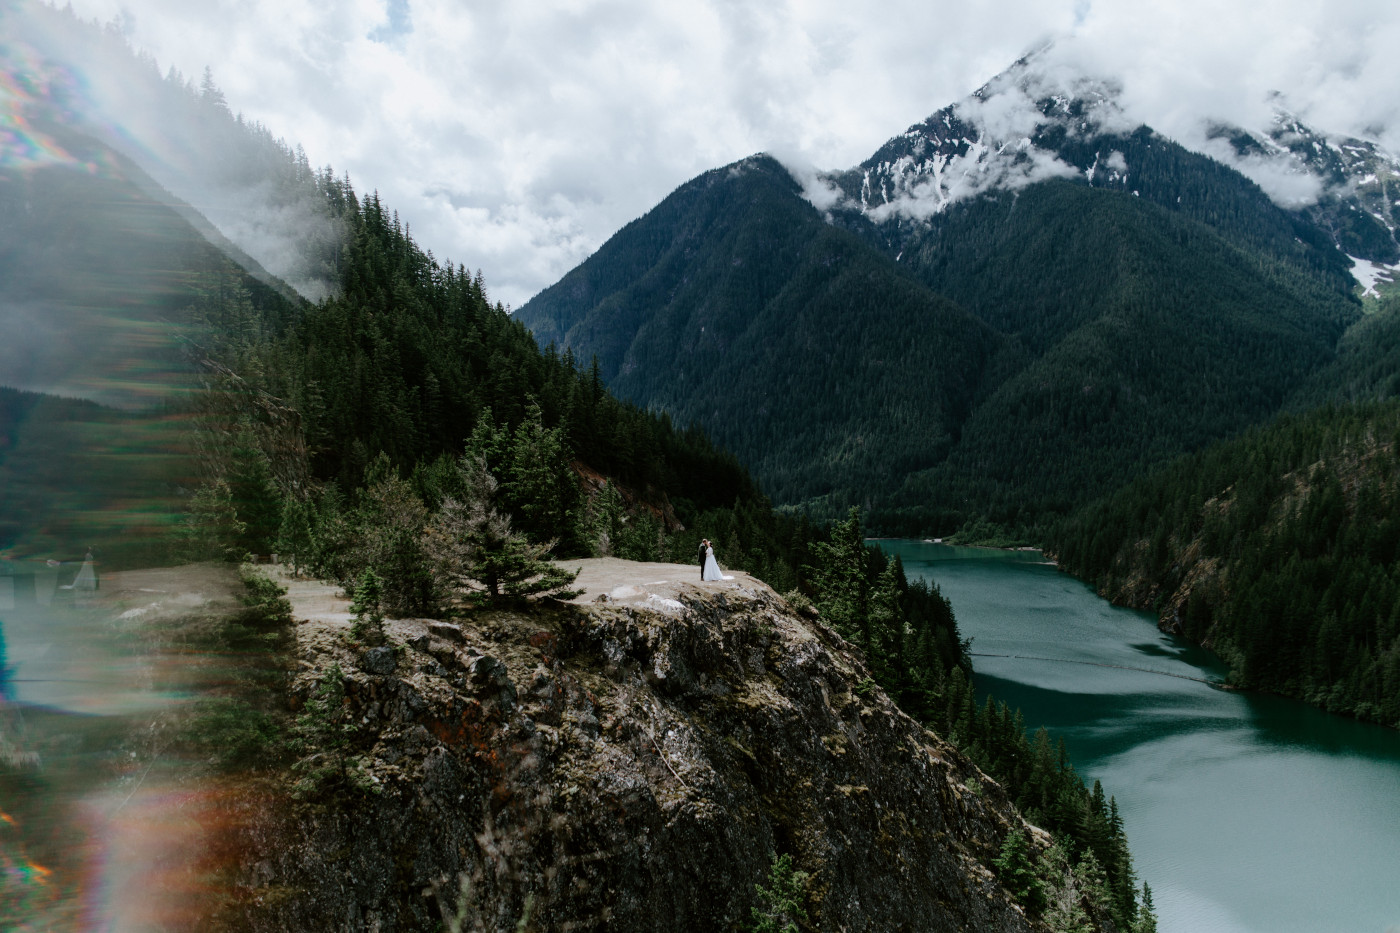 Elizabeth and Alex stand on the cliffside. Elopement photography at North Cascades National Park by Sienna Plus Josh.